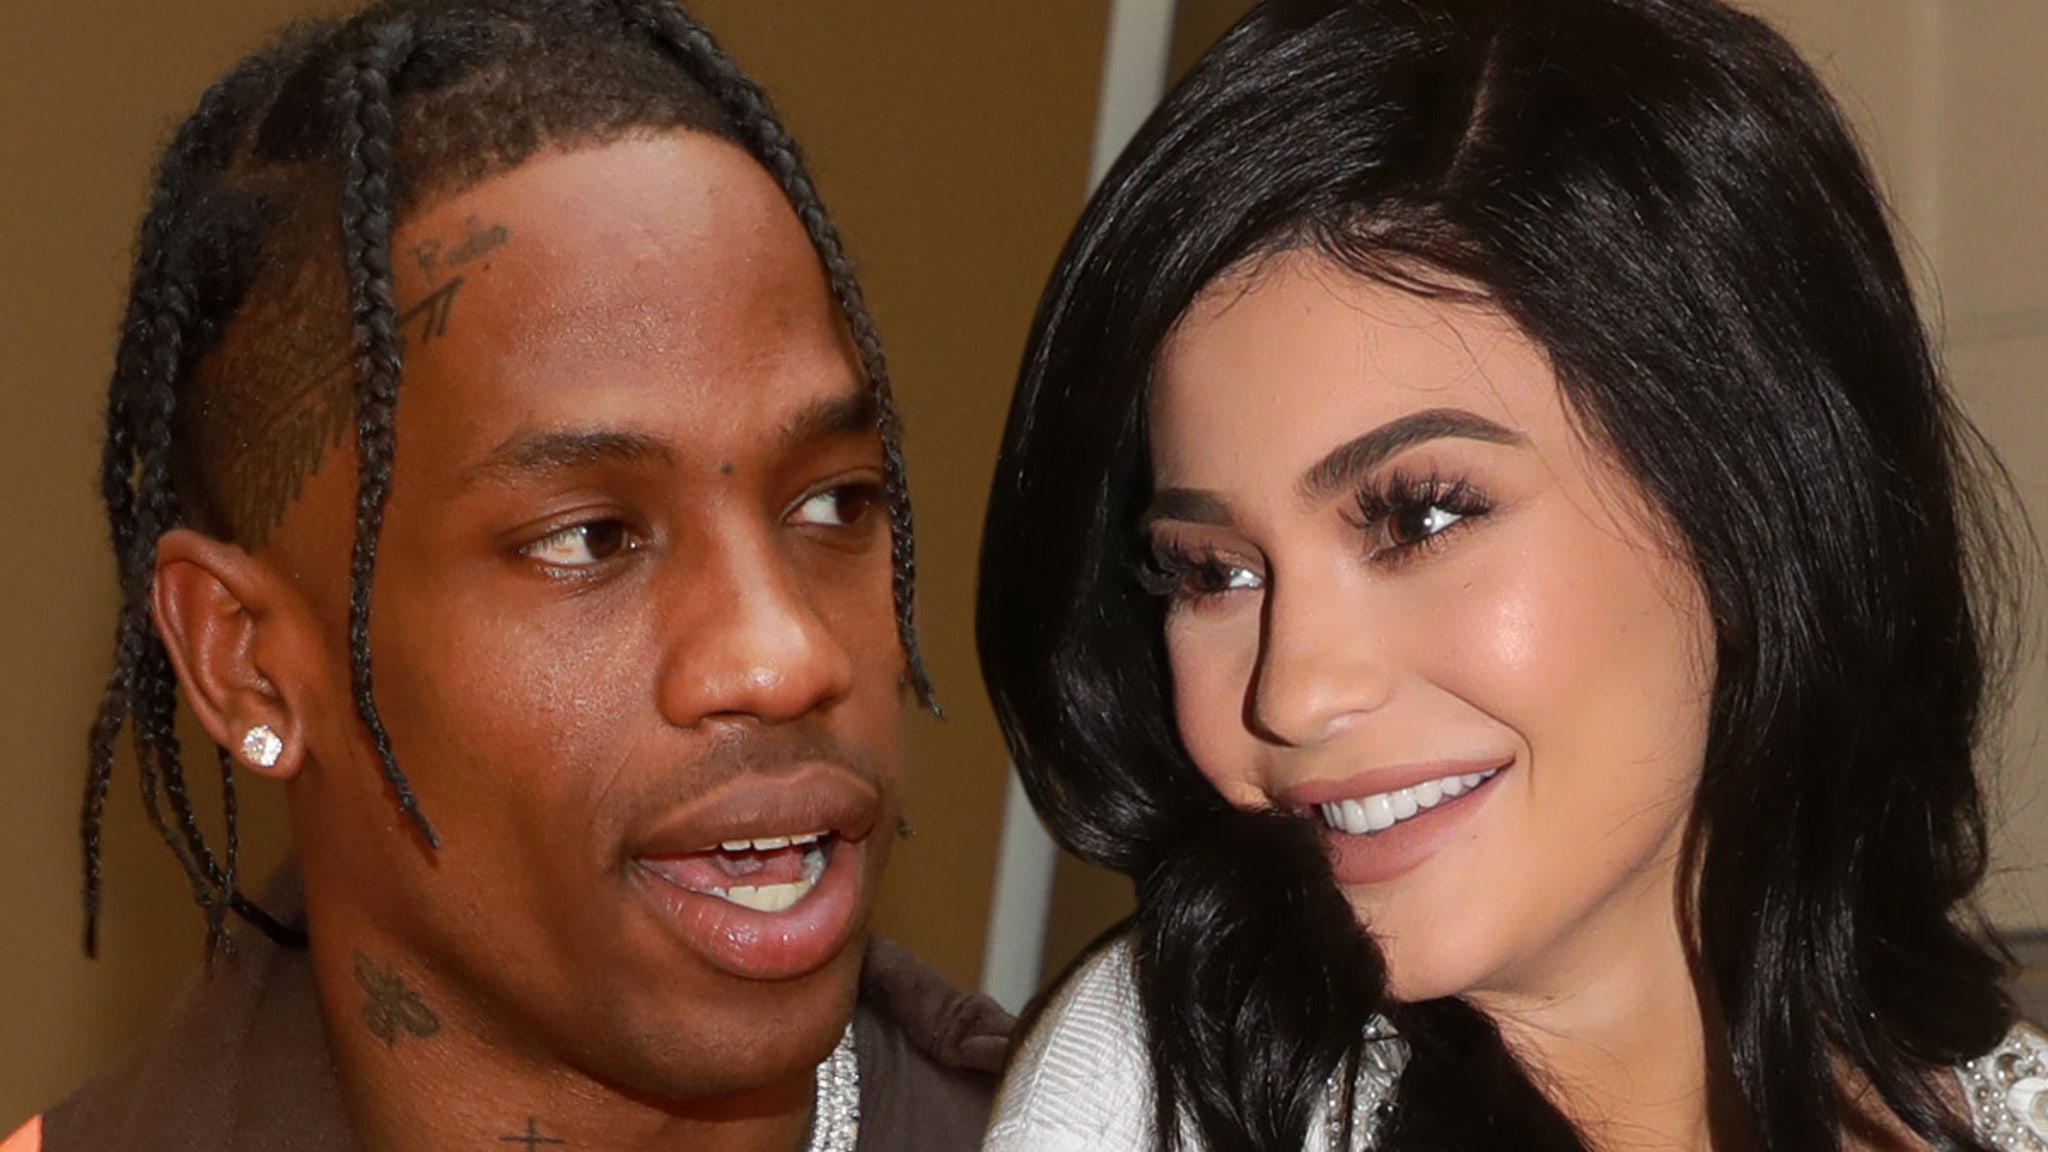 Kylie Jenner & Travis Scott Back Together, But Not Exclusively